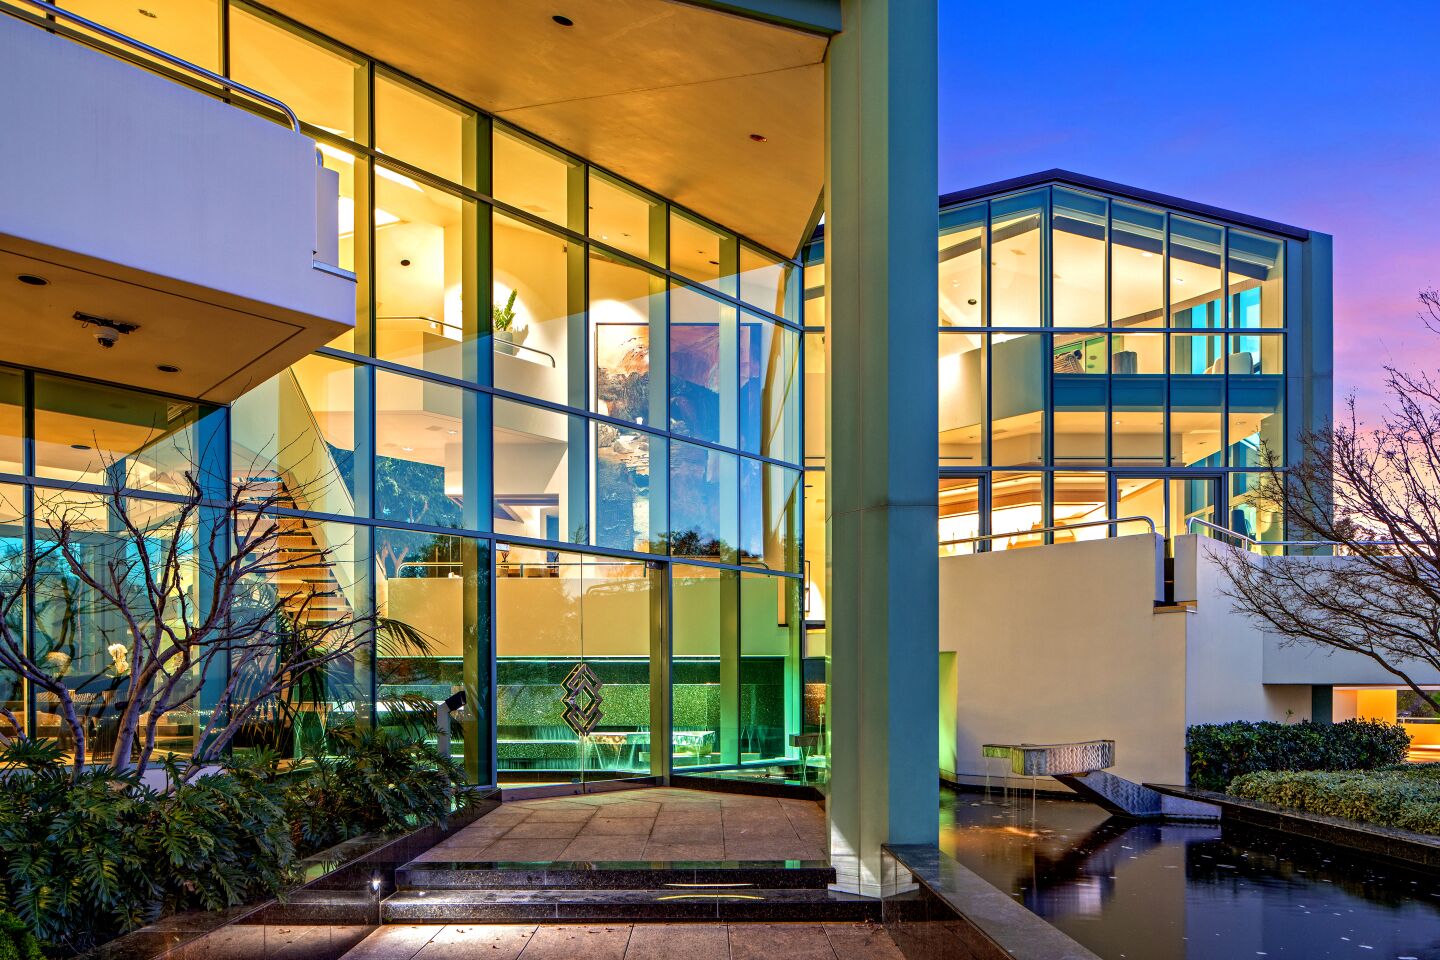 Grammy-winning artist Pharrell is asking $16.95 million for the ultra-modern compound he bought two years ago from filmmaker Tyler Perry.